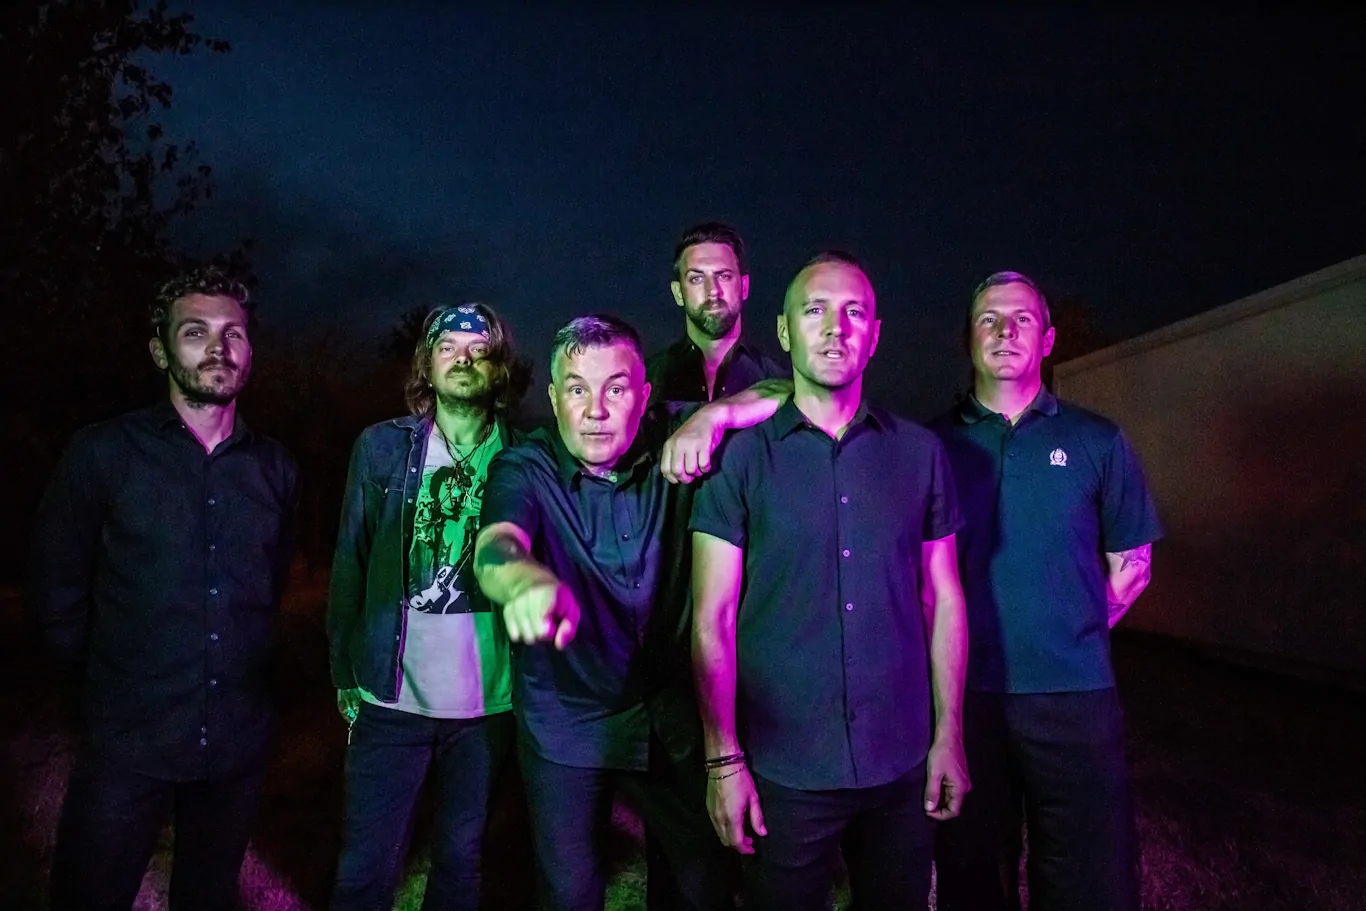 DROPKICK MURPHYS share ‘All You Tories’ in solidarity with RMT & NHS Strikers